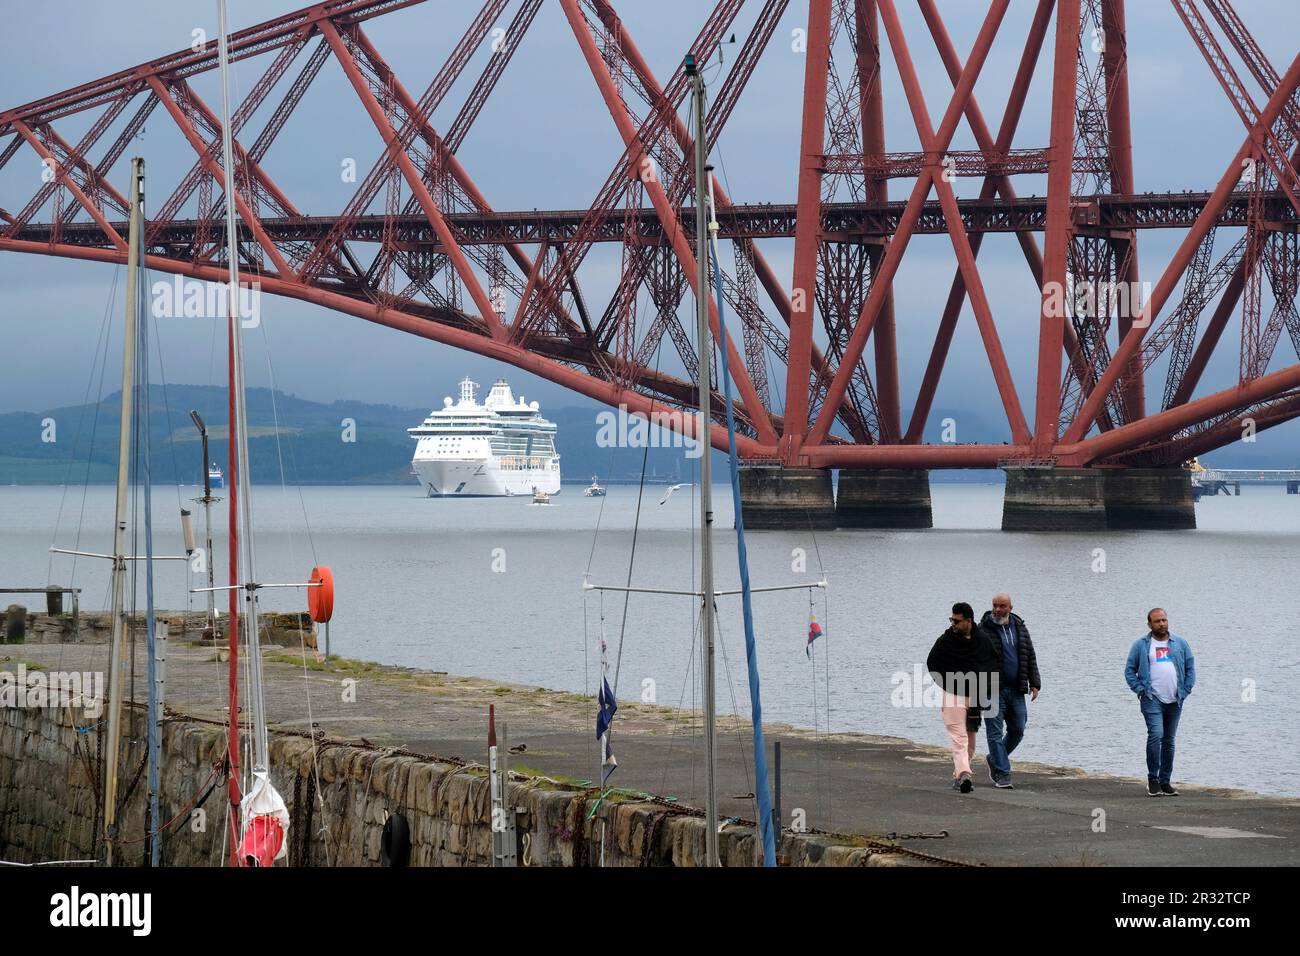 South Queensferry, Scotland, UK. 22nd May 2023. Jewel of the Seas, a 90,000 tonne, 965 feet, mega cruise liner with 12 passenger decks and equiped with its own waterpark, theatre, casino, elevators and rock climbing wall, arrived in the Forth estuary this morning for a rare stopover. Berthed beside the Forth bridge allowing the sense of scale to be appreciated. Credit: Craig Brown/Alamy Live News Stock Photo